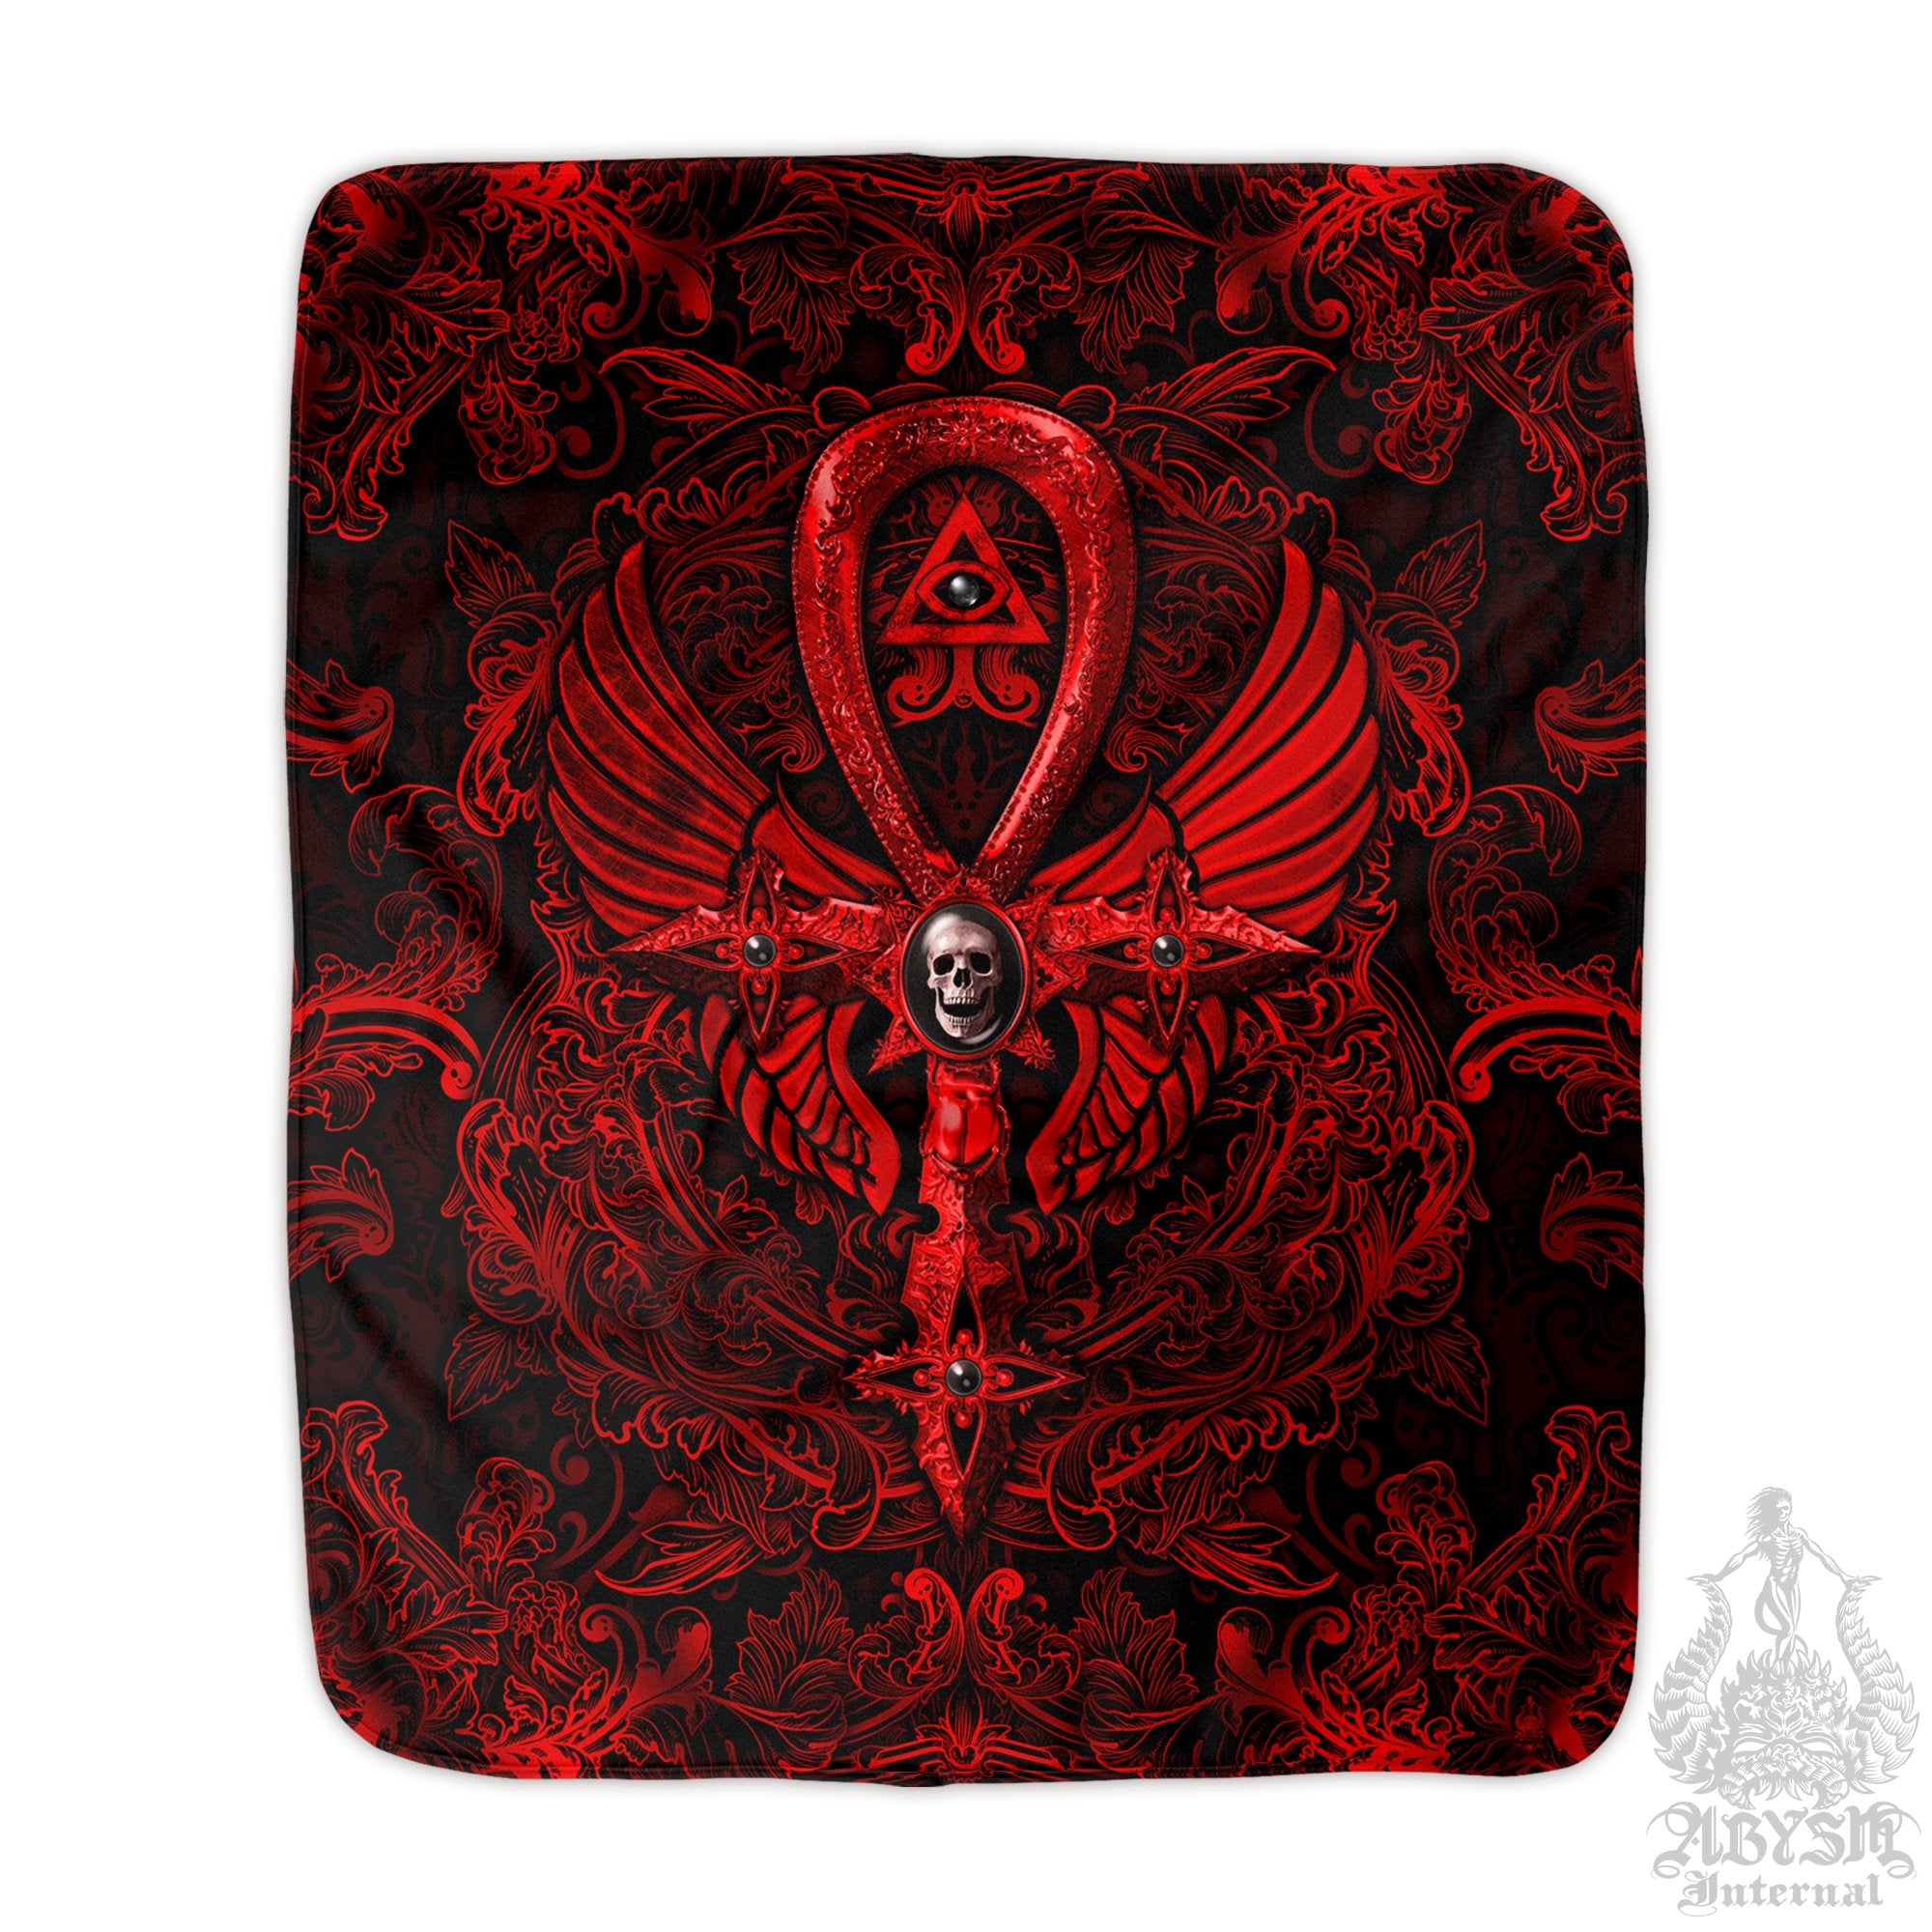 Bloody Goth Sherpa Fleece Throw Blanket, Gothic Home Decor, Alternative Art Gift - Ankh Cross, Dark Red, Black and Gold, 3 Colors - Abysm Internal